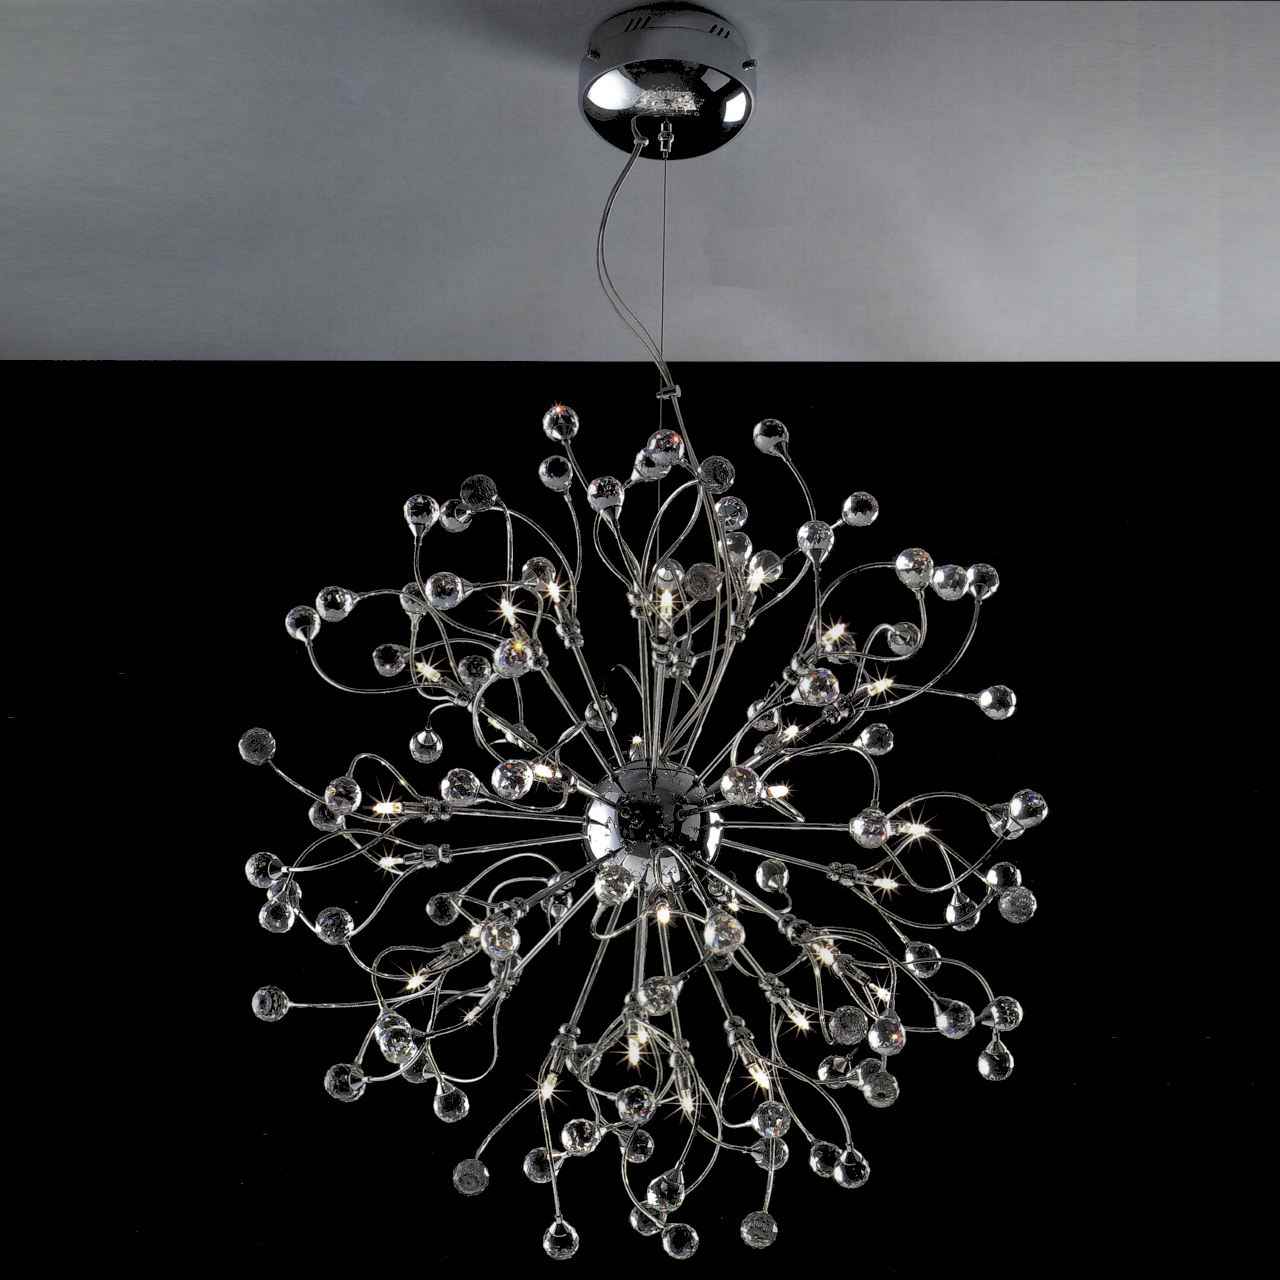 Brizzo Lighting Stores. 30\u0026quot; Sfera Modern Crystal Round Chandelier Polished Chrome 32 Lights